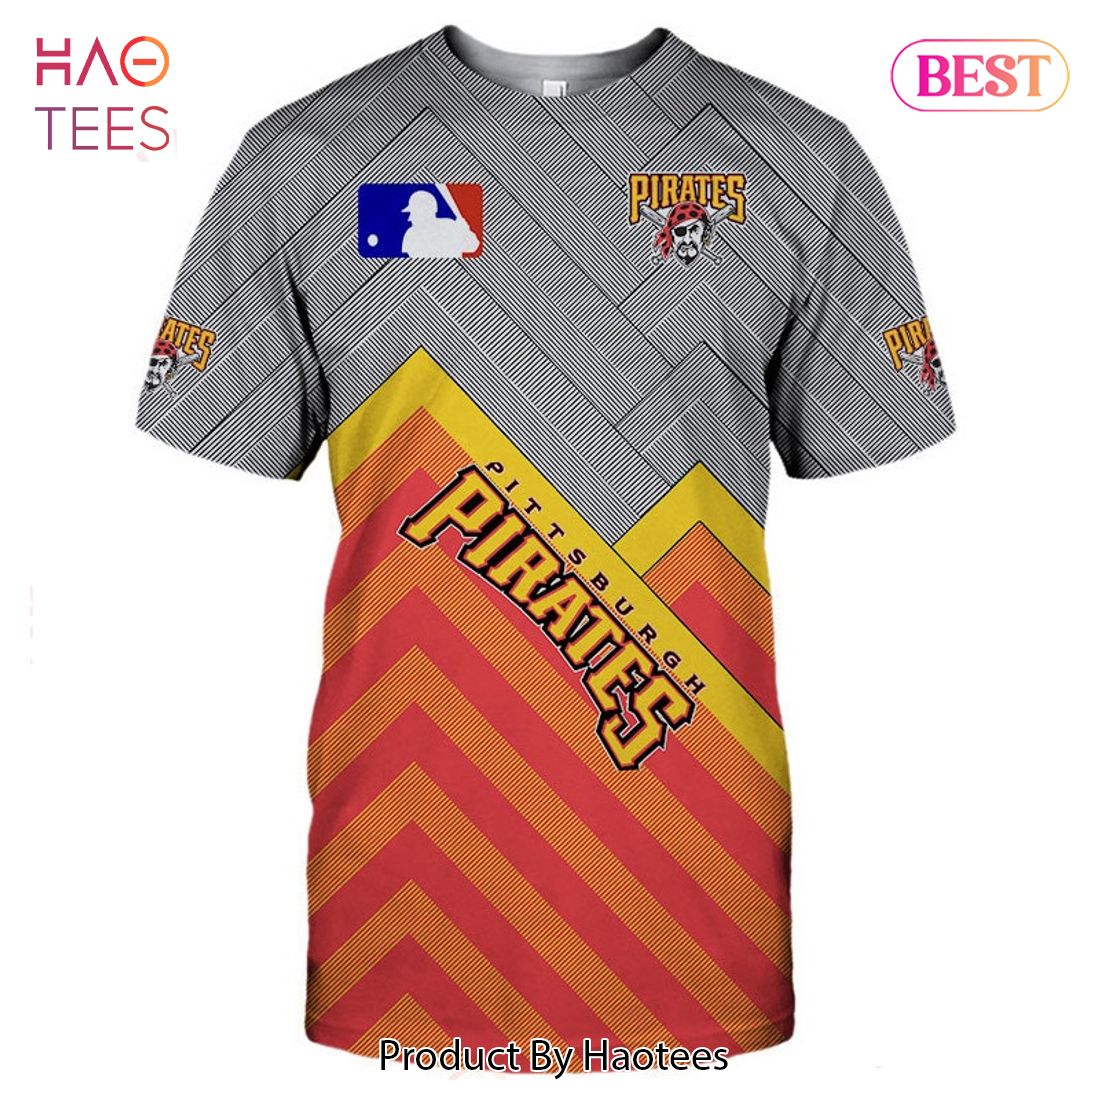 pittsburgh pirates home jersey